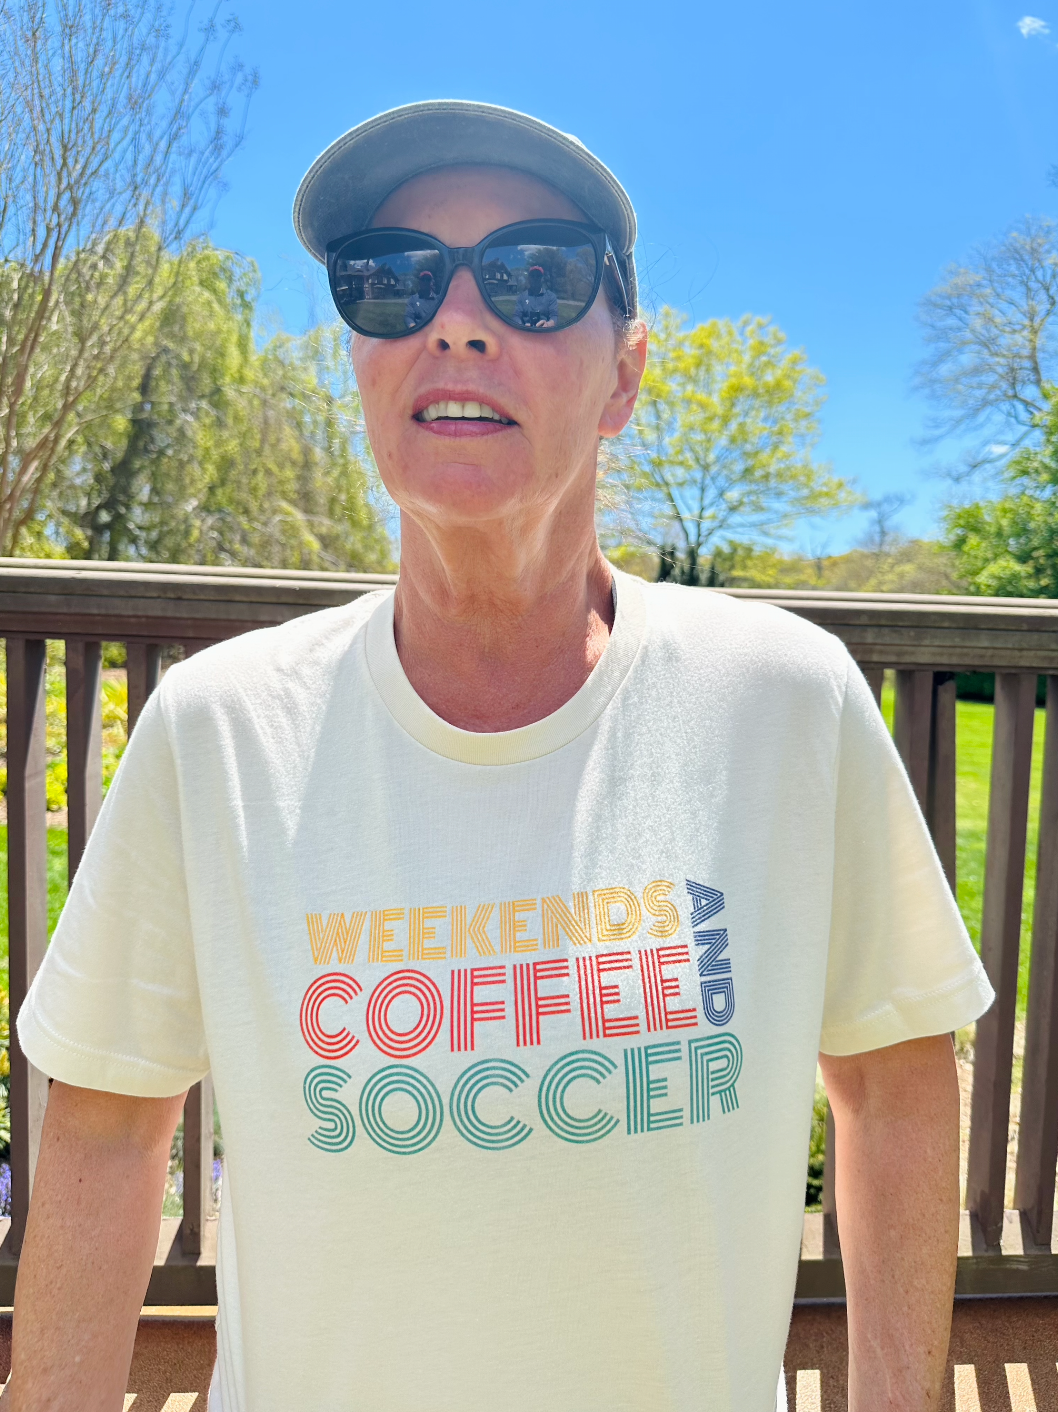 Weekends Coffee and Soccer Adult T-Shirt